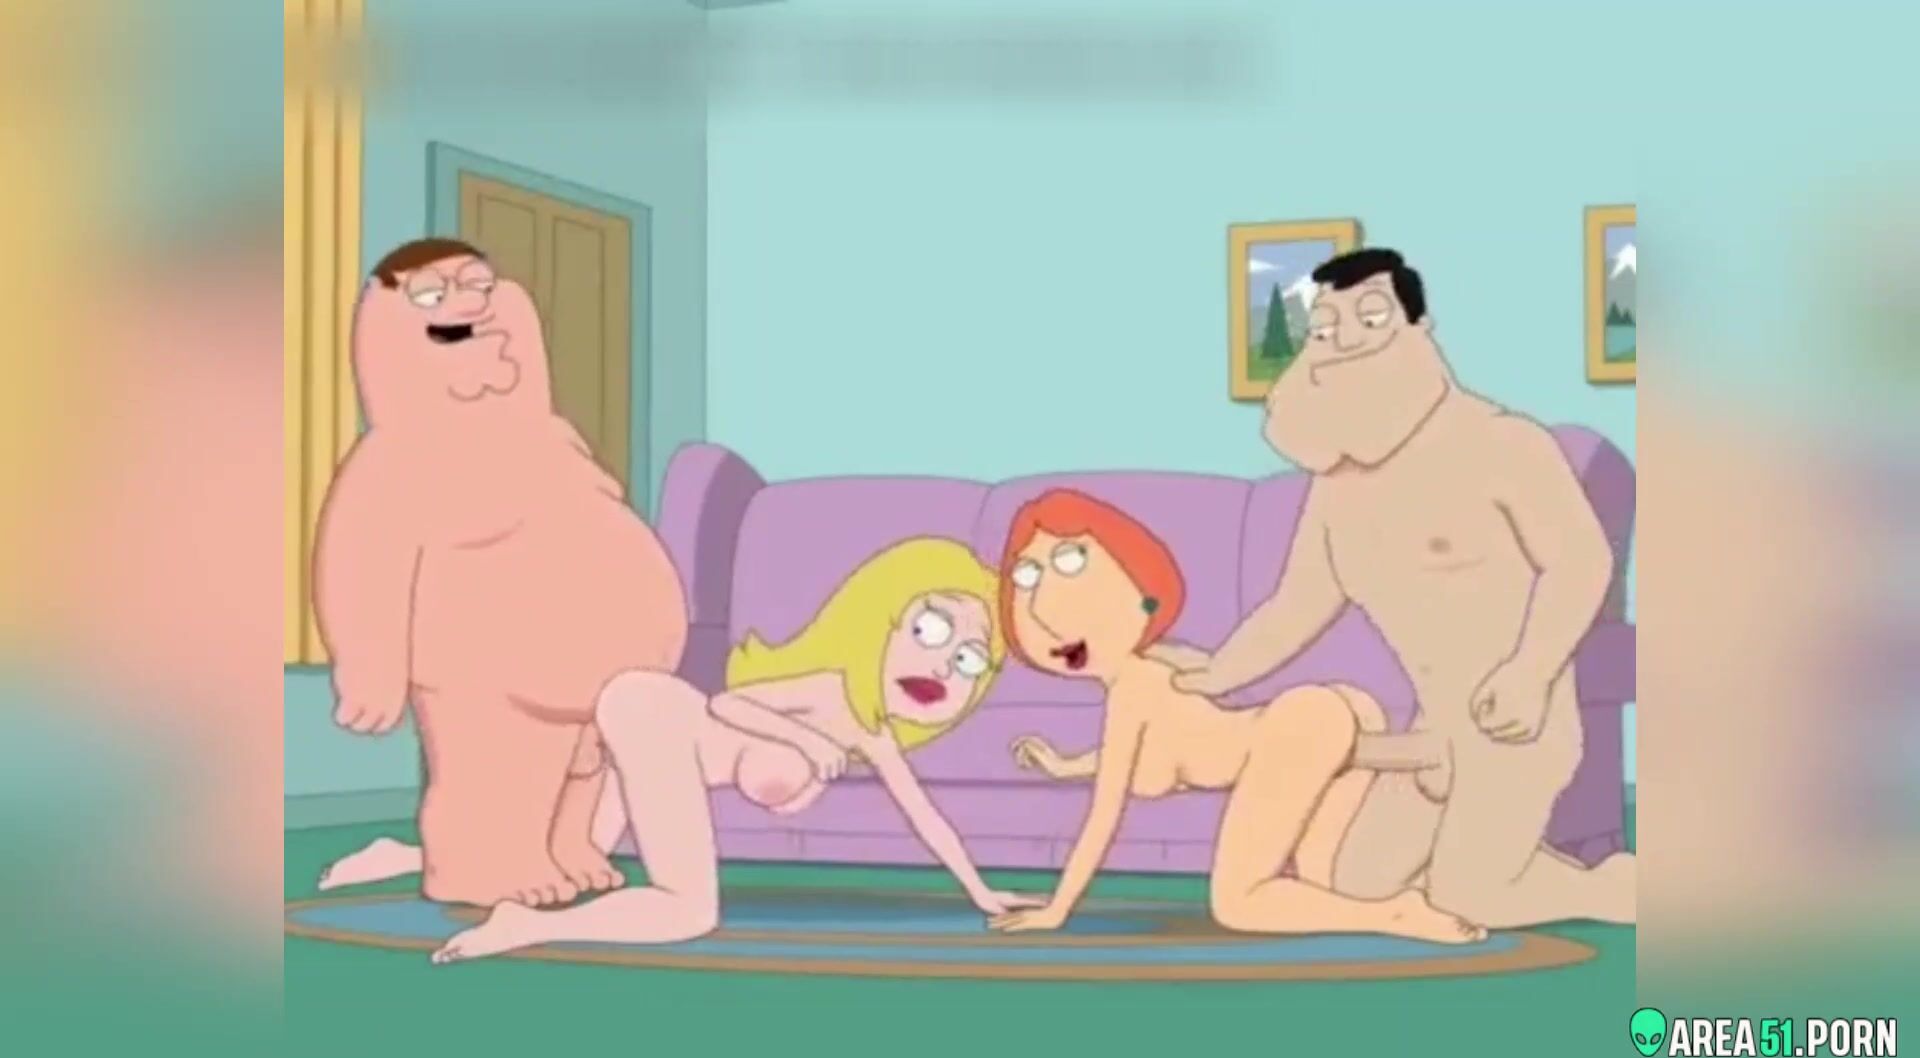 1920px x 1058px - 3D cartoon! Mommy Lois Griffin and Peter in hardcore orgy with friends |  AREA51.PORN